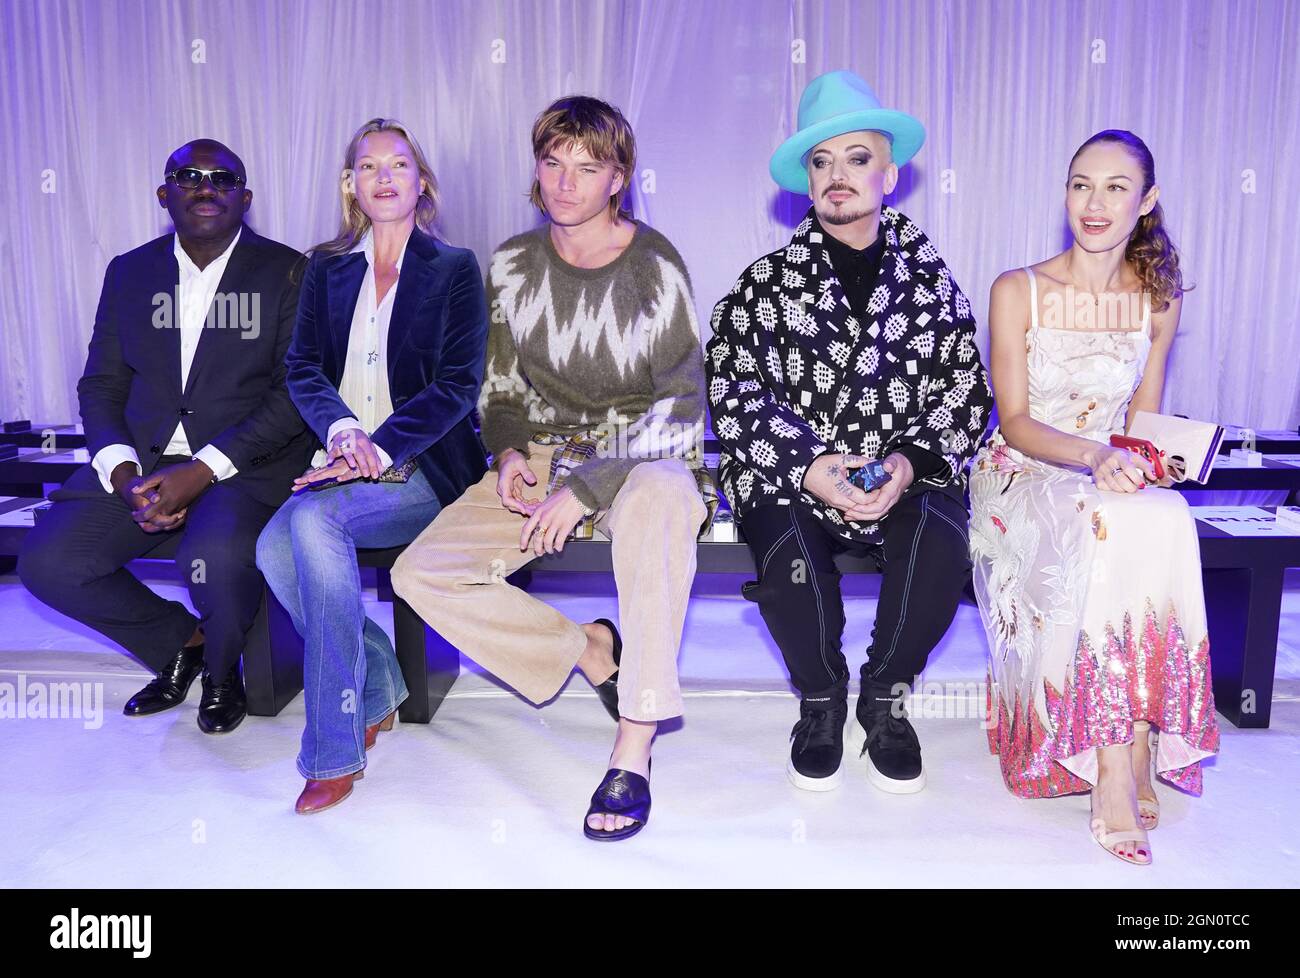 front-row-guests-left-to-right-ed-enninful-kate-moss-jordan-barrett-boy-george-and-olga-kurylenko-before-the-london-fashion-week-2021-richard-quinn-show-held-at-the-londoner-hotel-leicester-square-london-picture-date-tuesday-september-21-2021-2GN0TCC.jpg